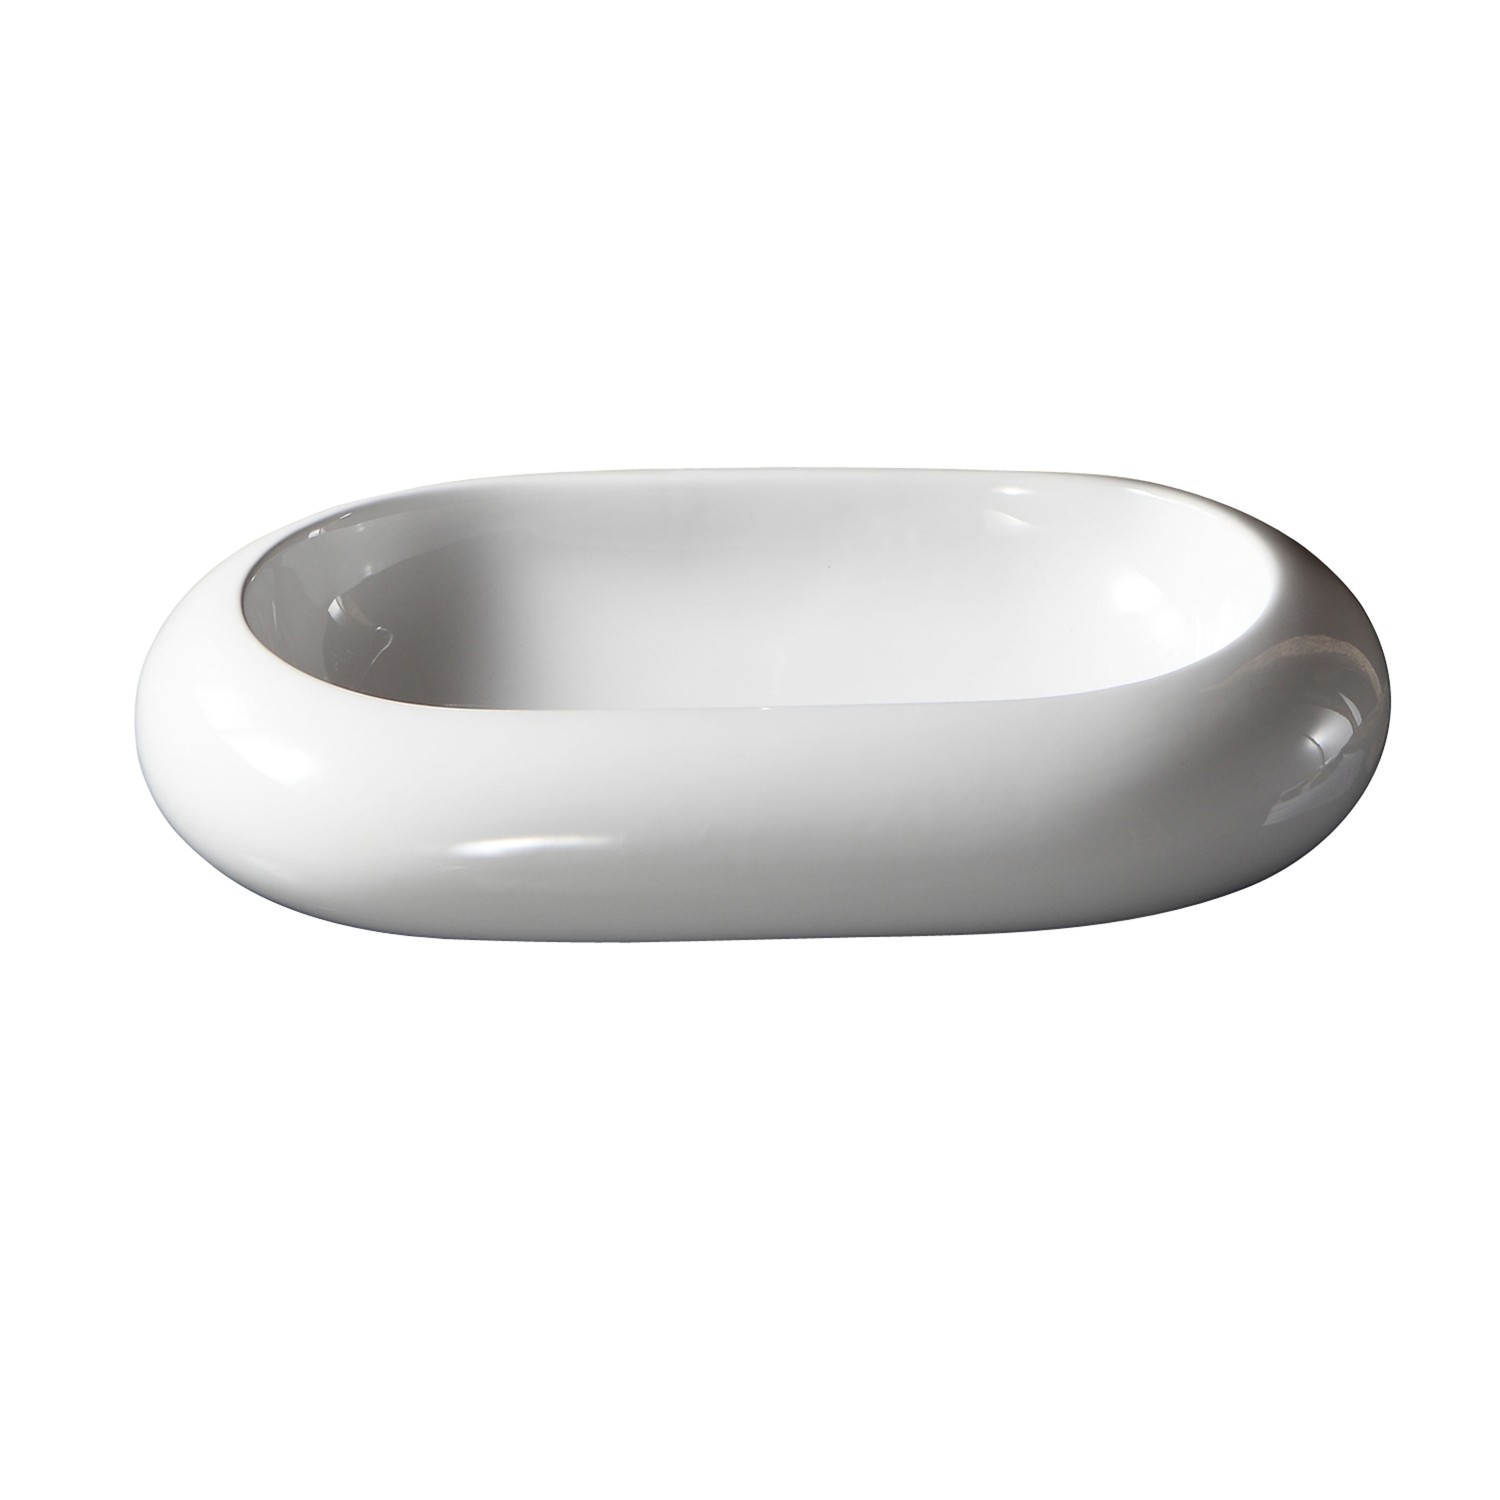 BARCLAY 4-8050WH HOLTON 25 3/8 INCH SINGLE BASIN ABOVE COUNTER BATHROOM SINK - WHITE